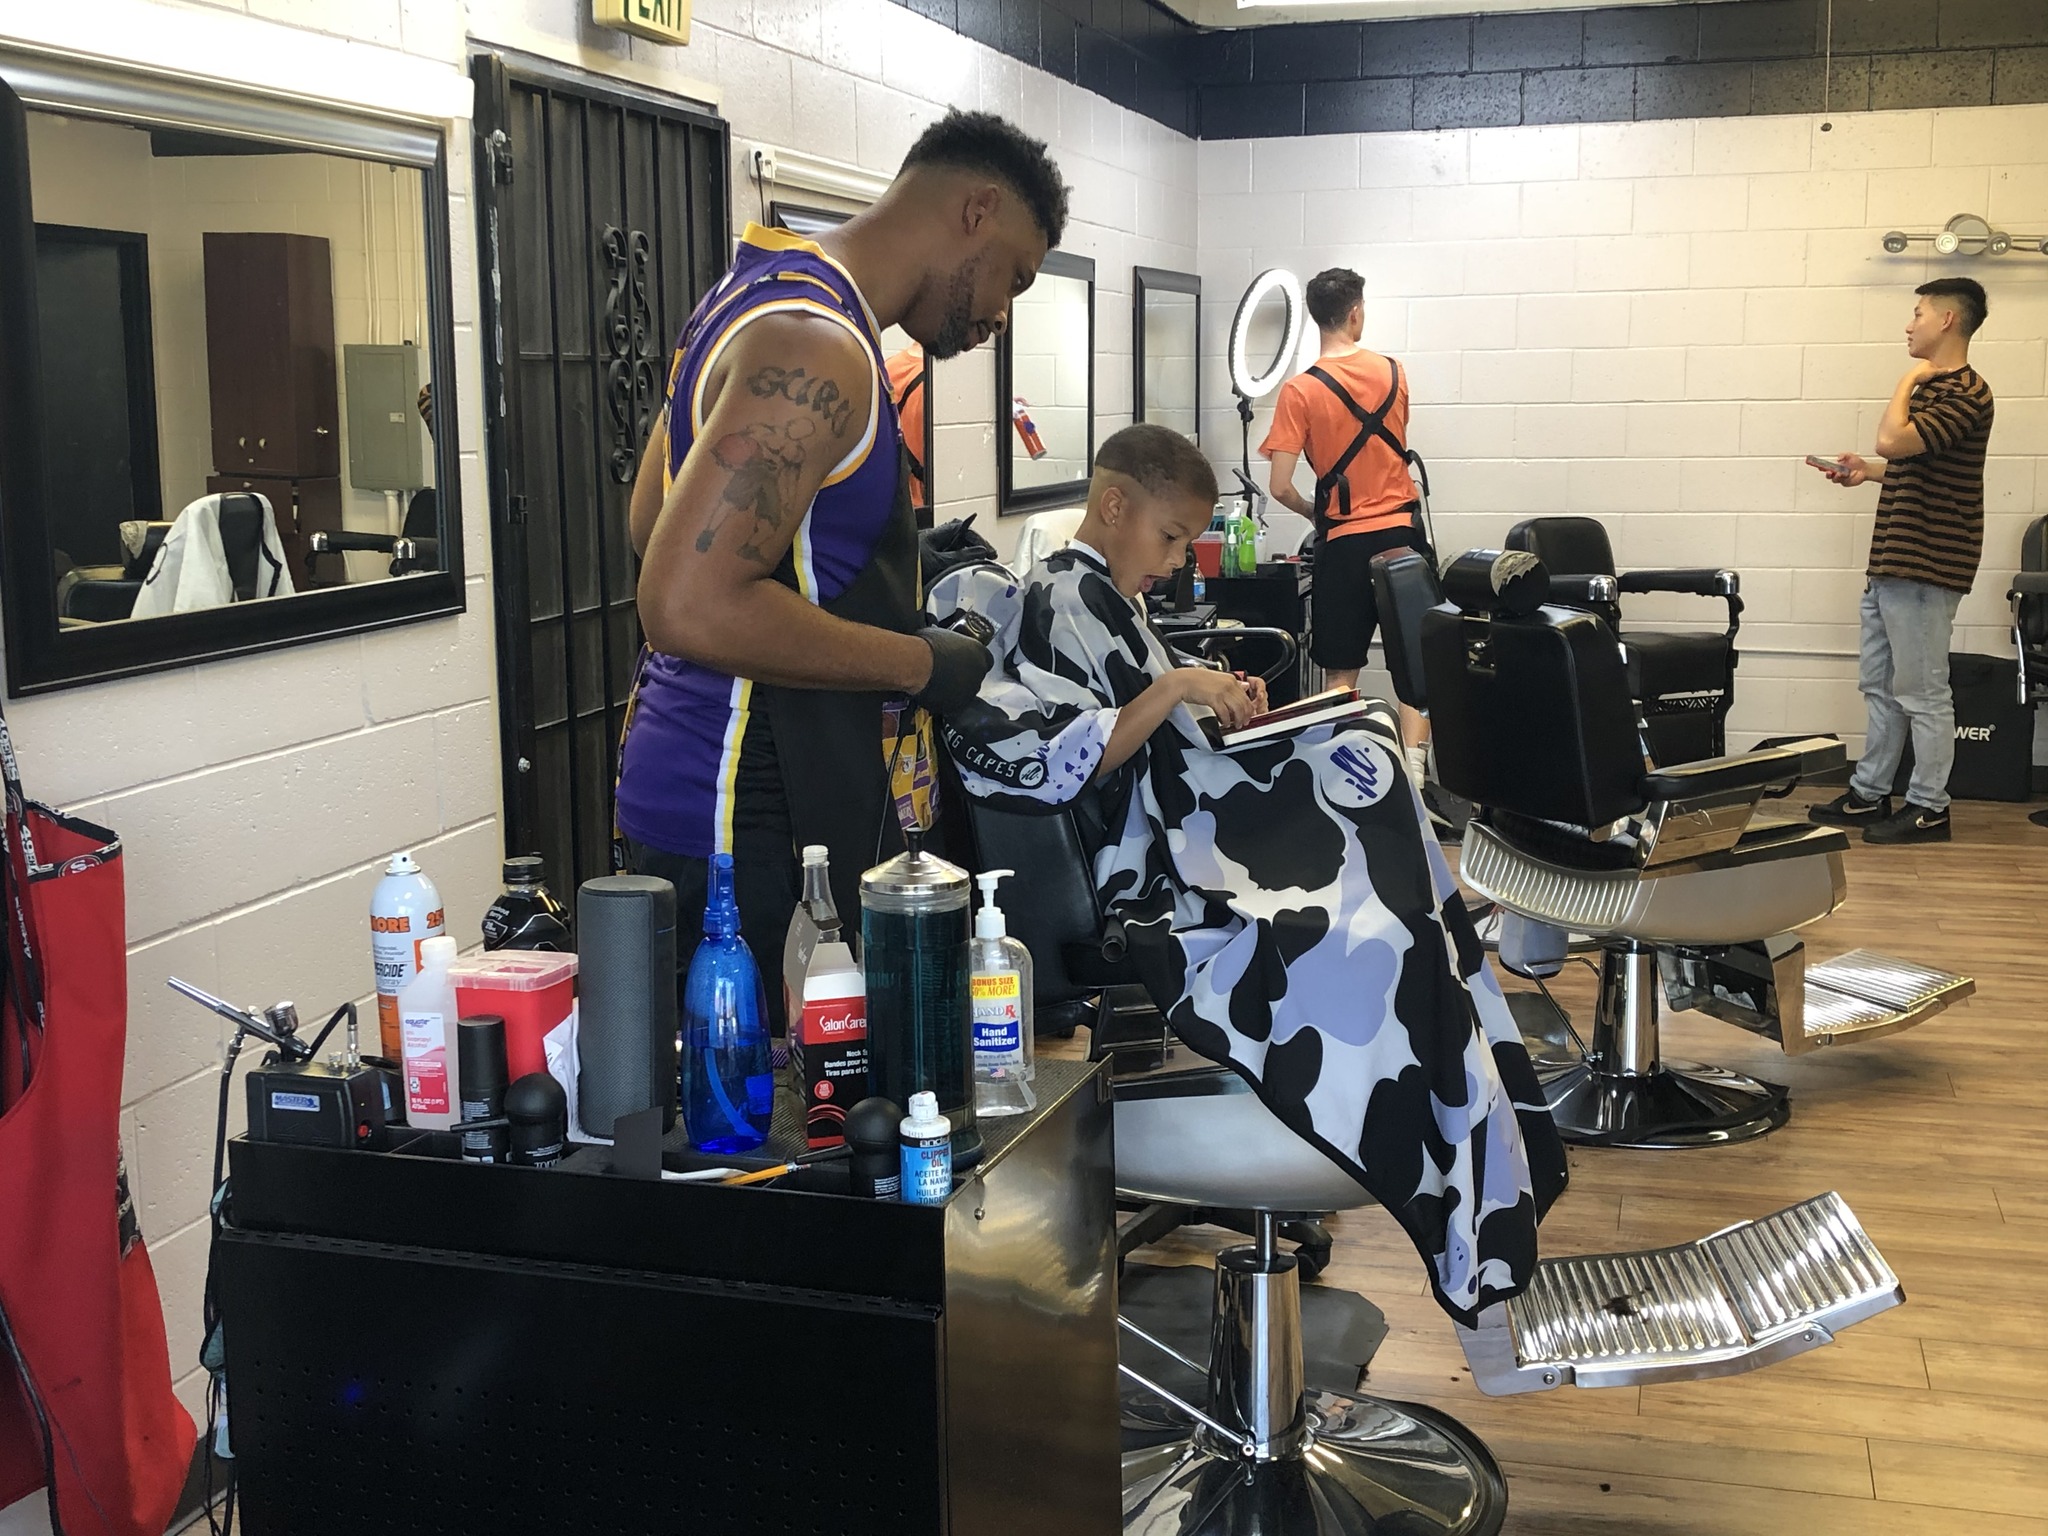 A young boy reading in a barbershop while a man cuts his hair